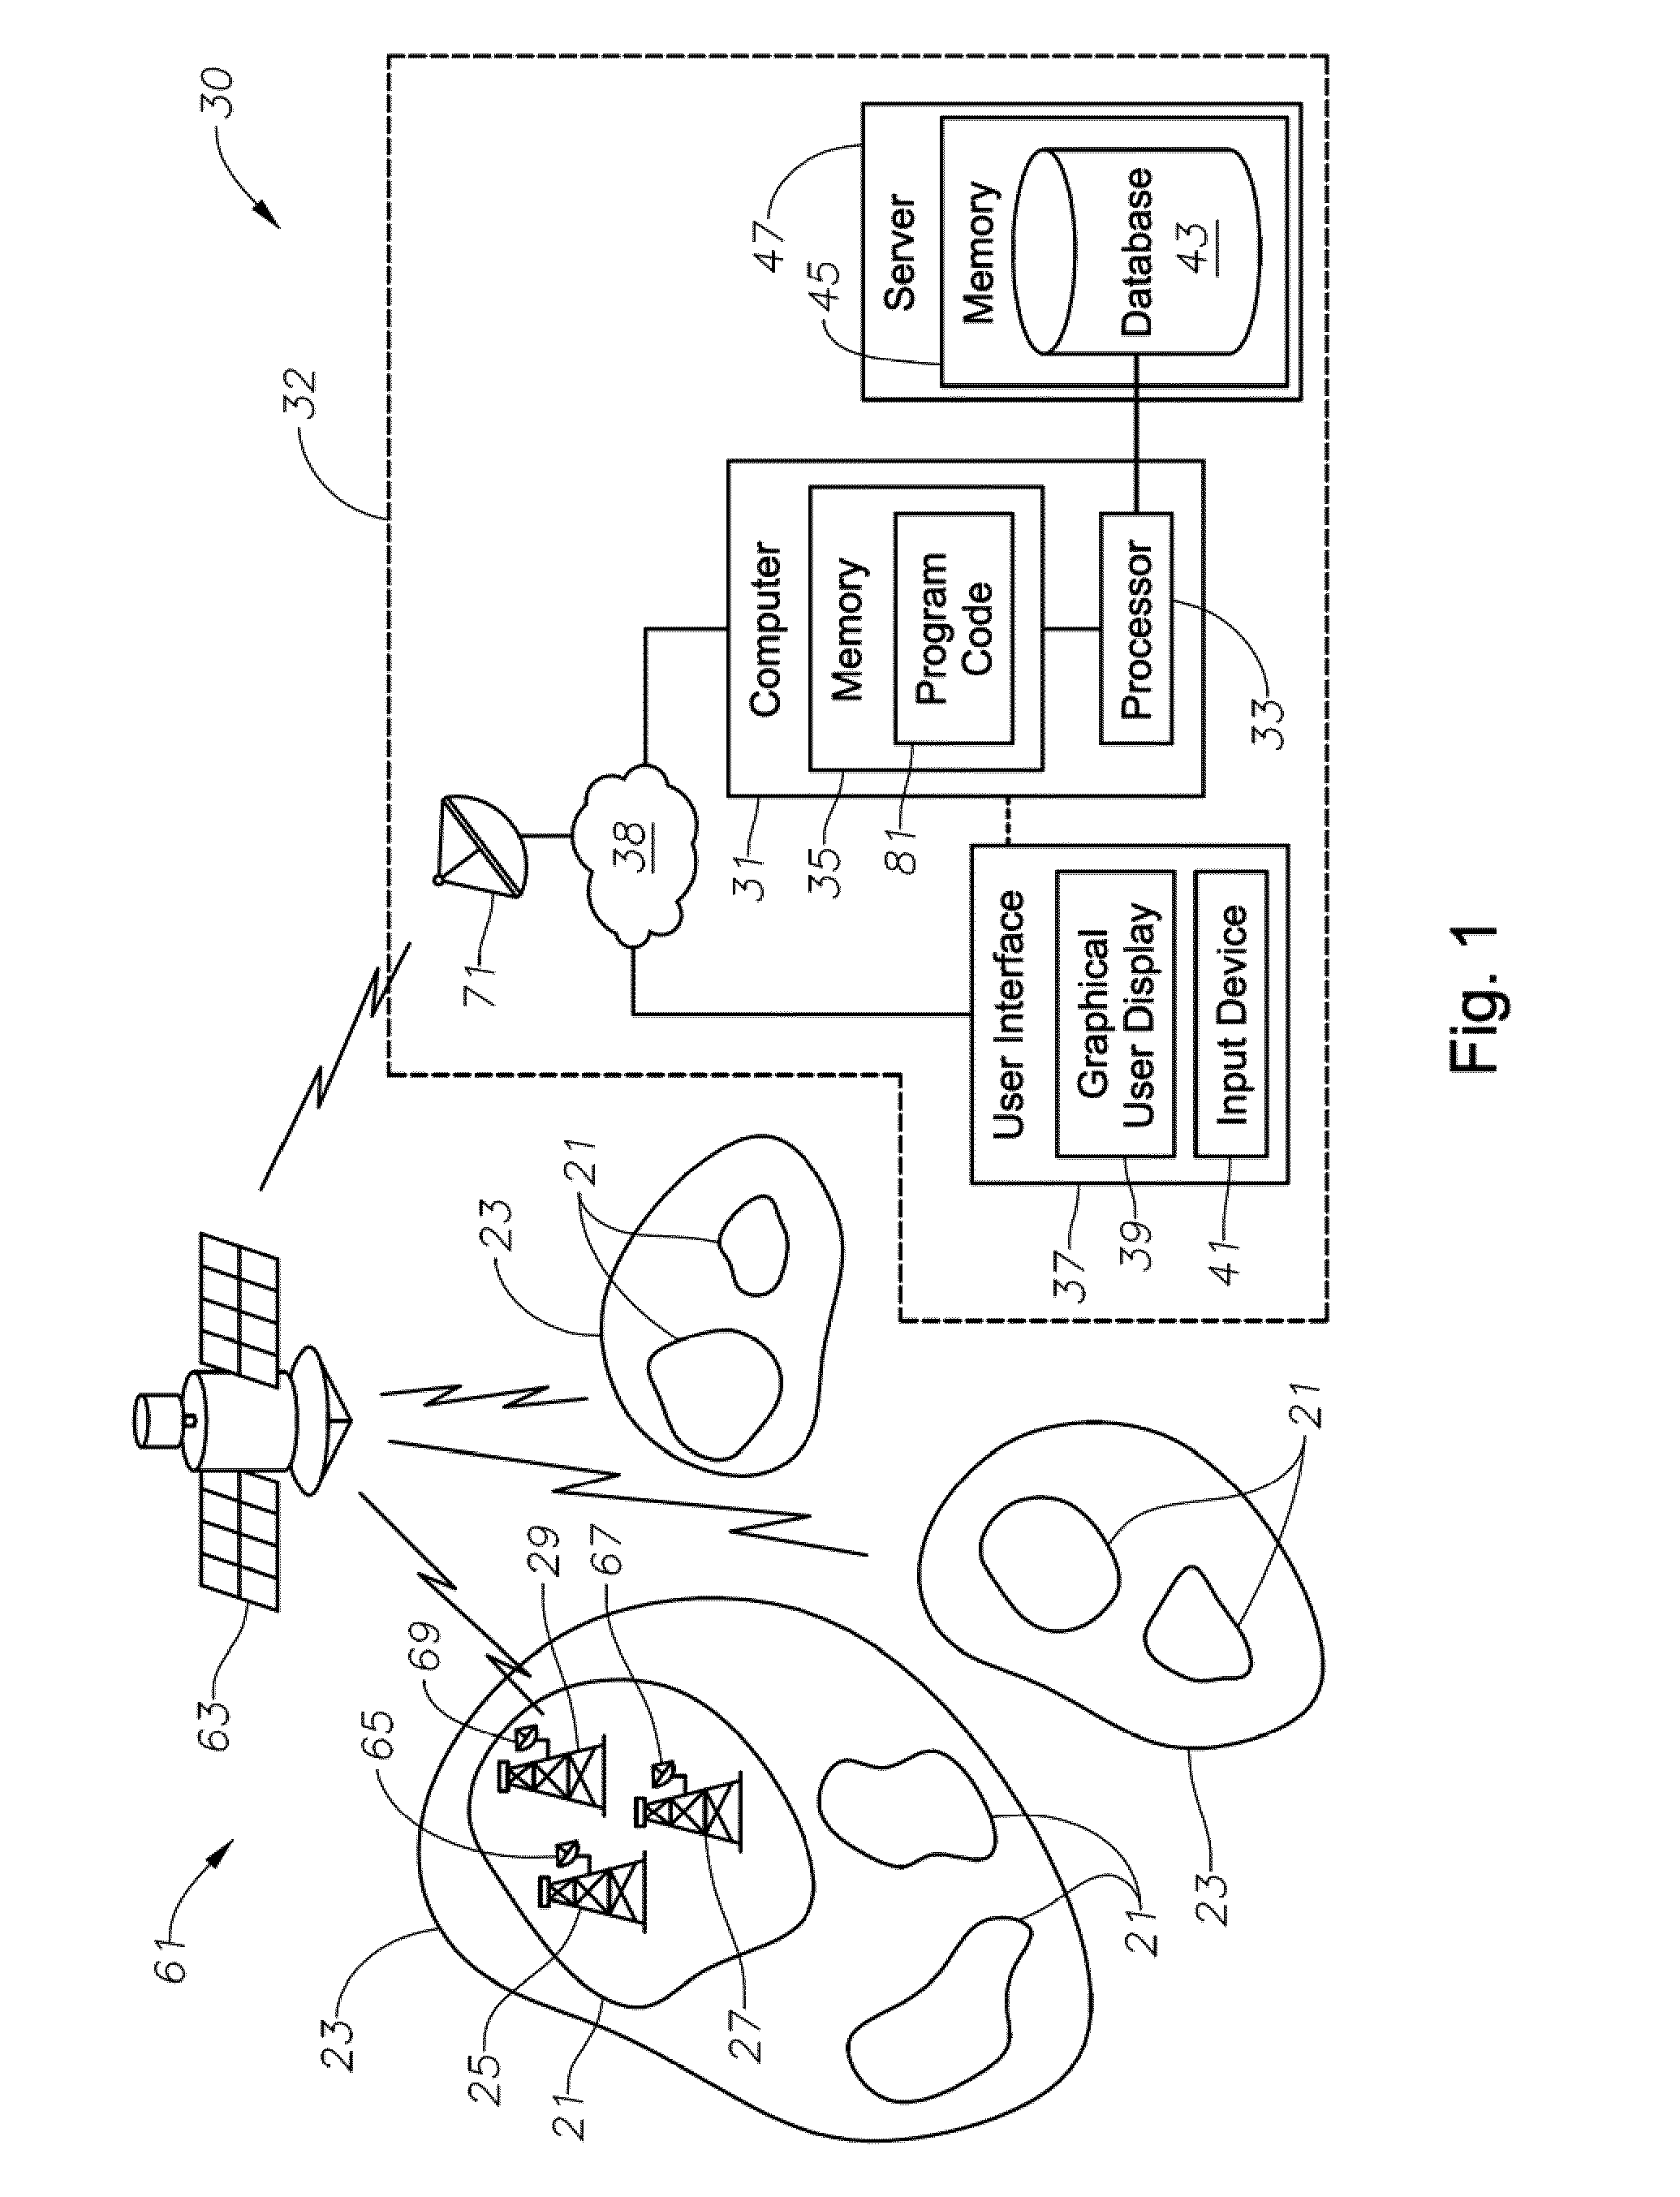 System, program product, and related methods for performing automated real-time reservoir pressure estimation enabling optimized injection and production strategies